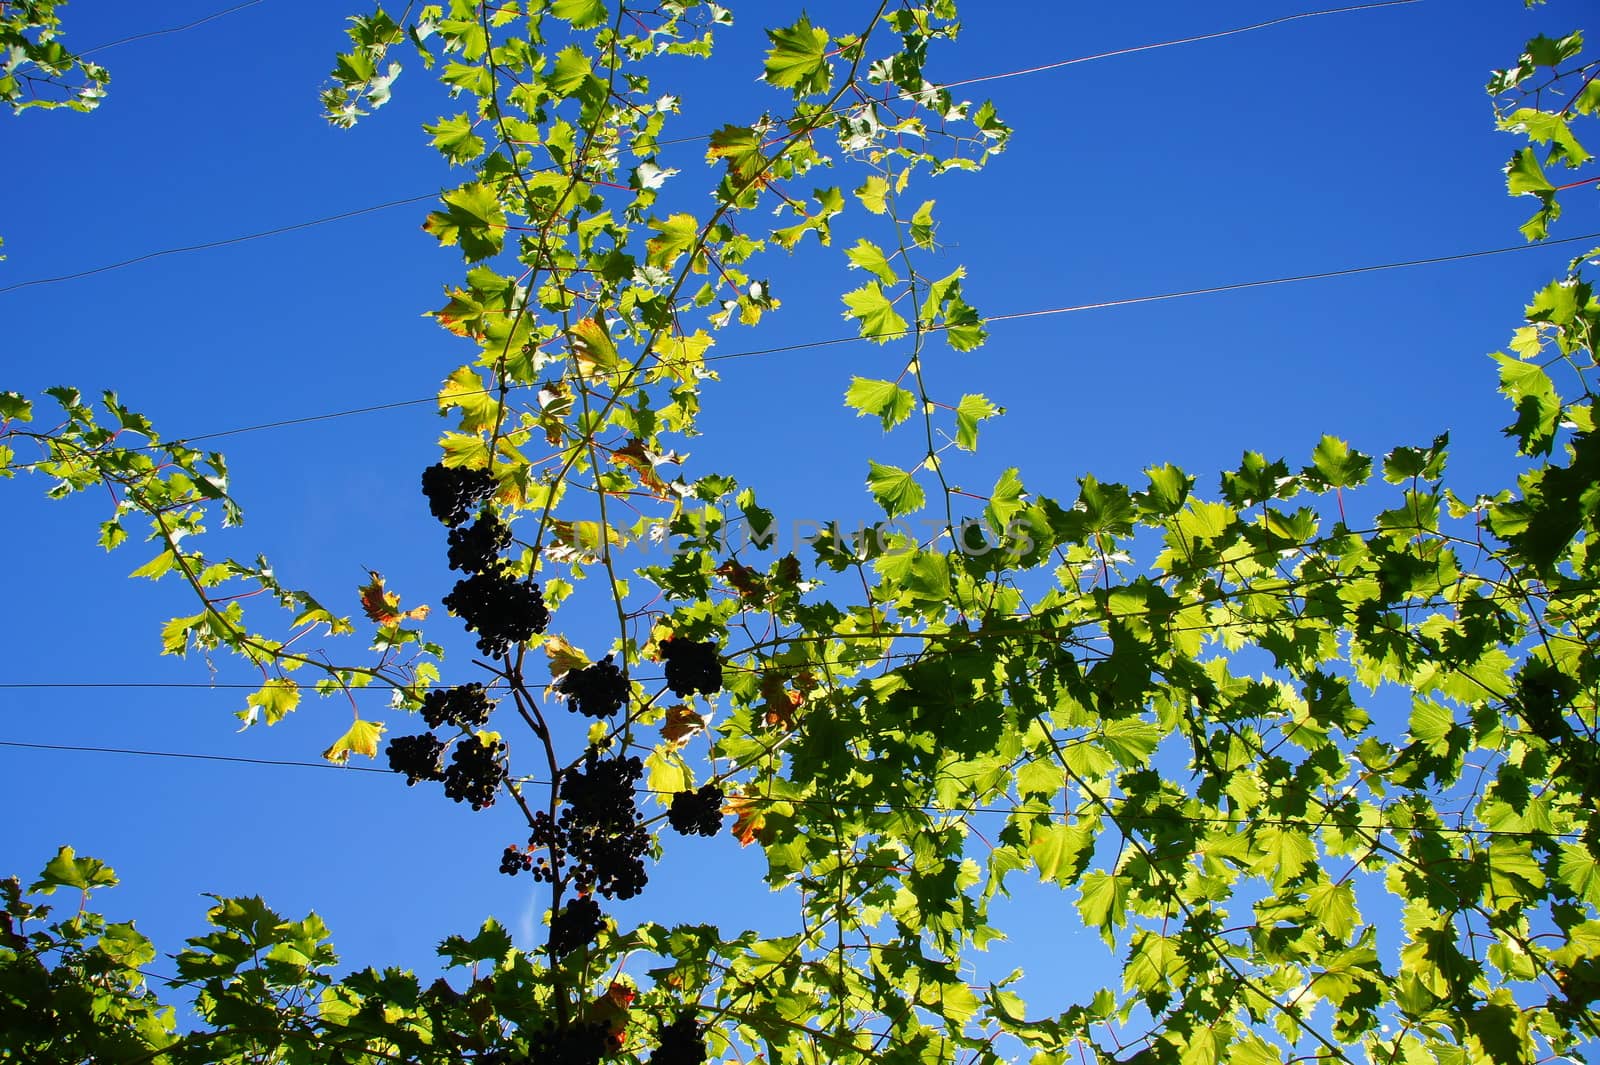 Foliage with blue grapes in South Tyrol